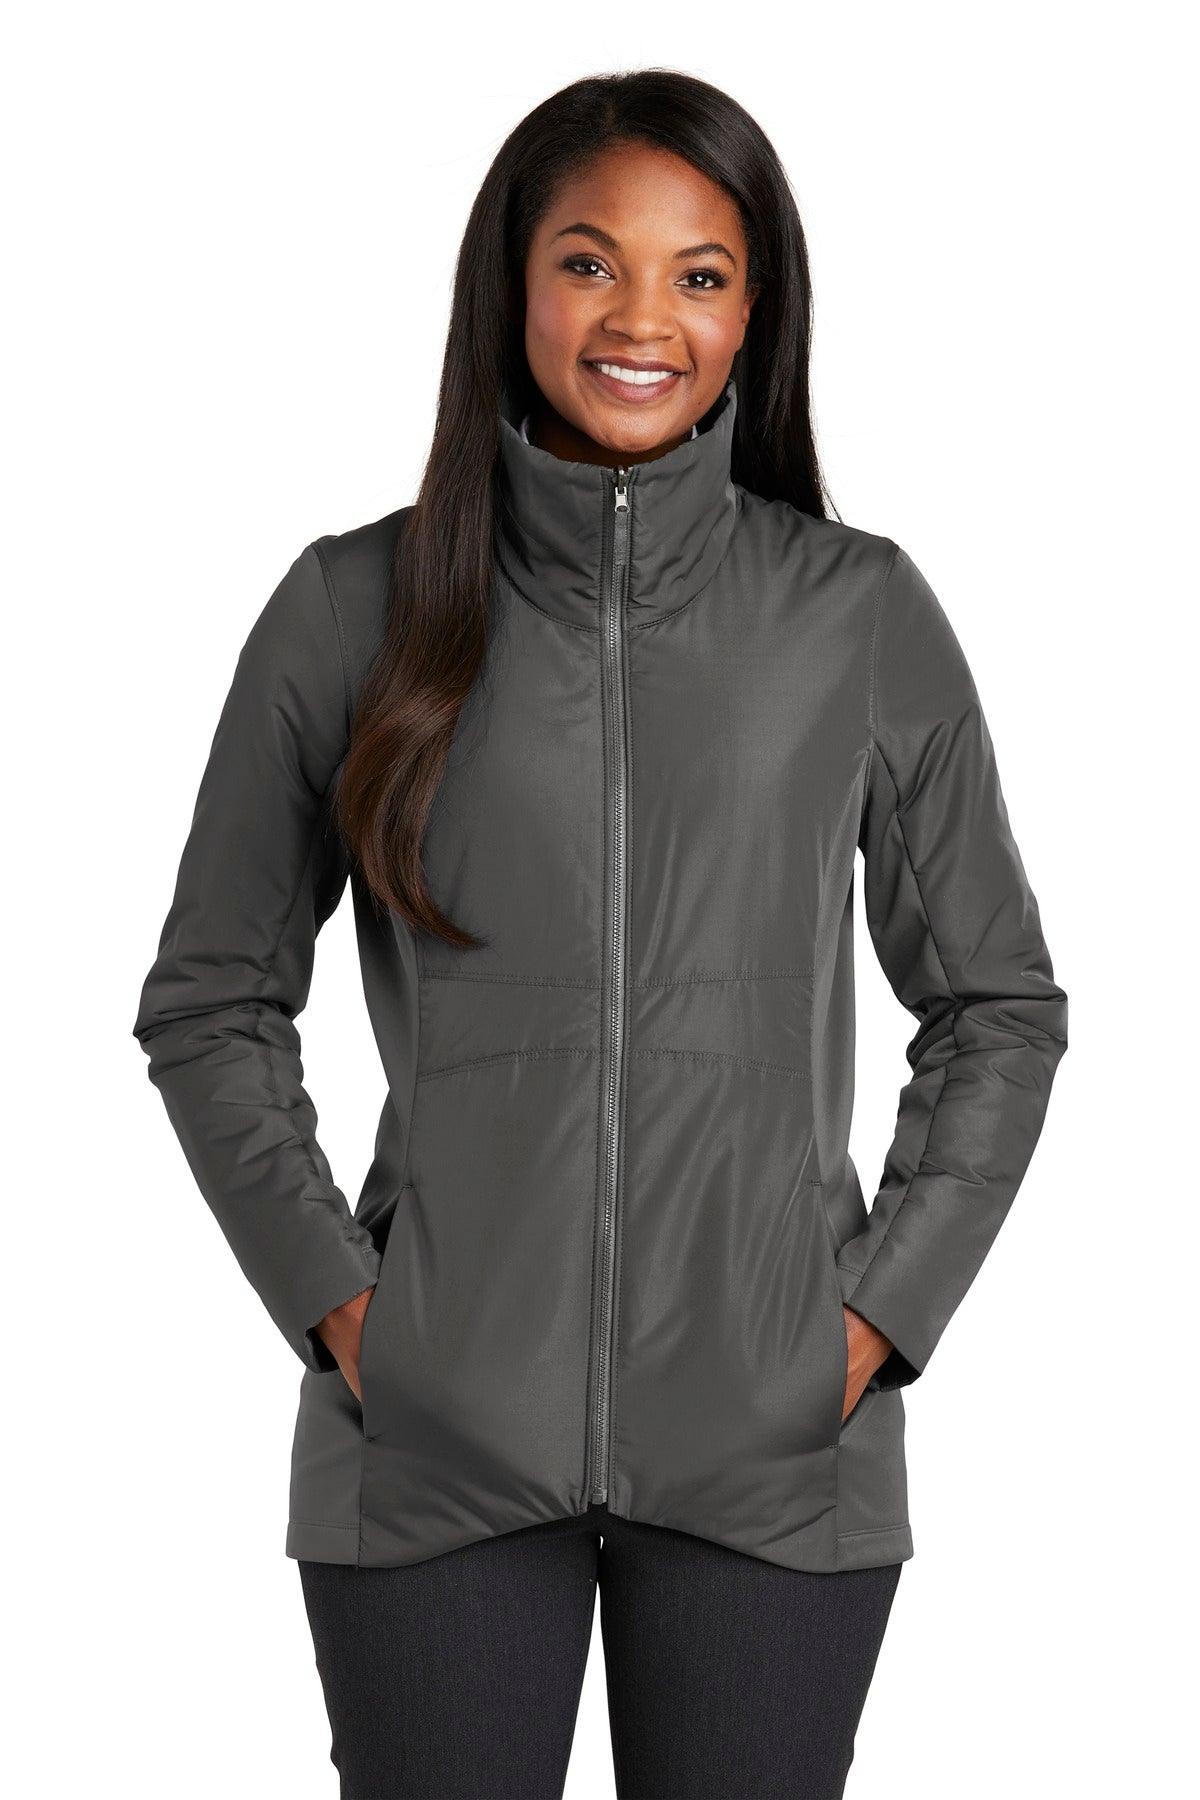 Port Authority Ladies Collective Insulated Jacket. L902 - Dresses Max